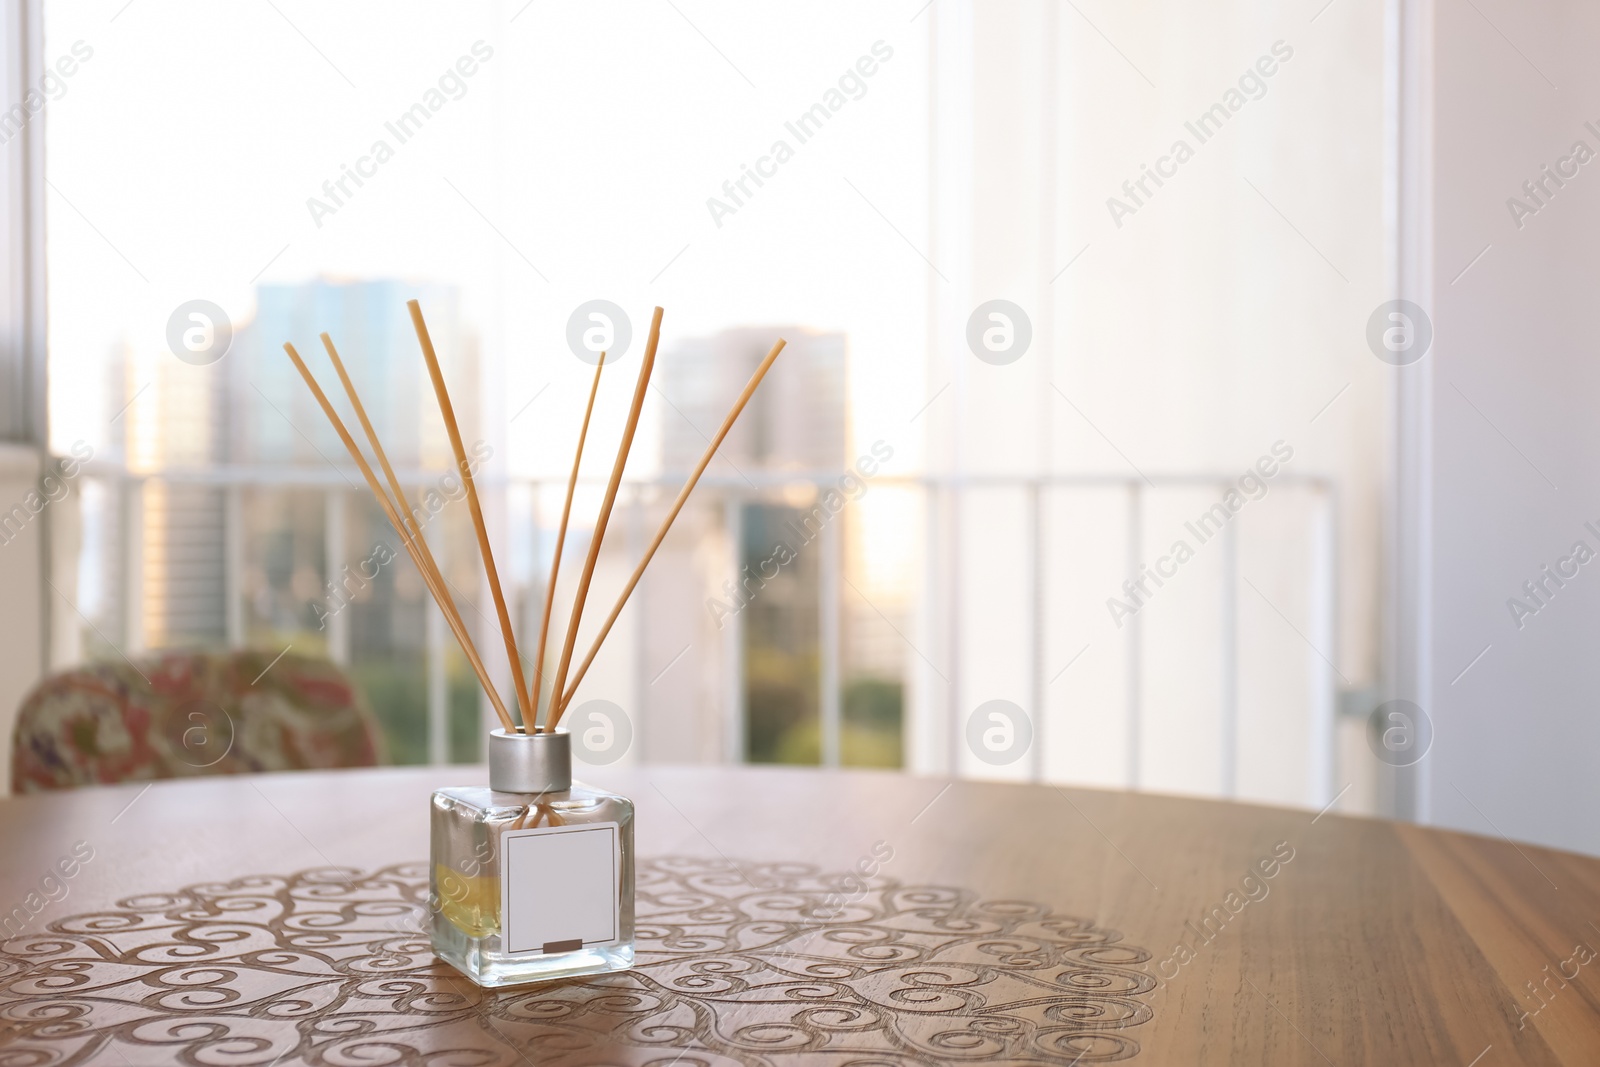 Photo of Reed air freshener on wooden table in room